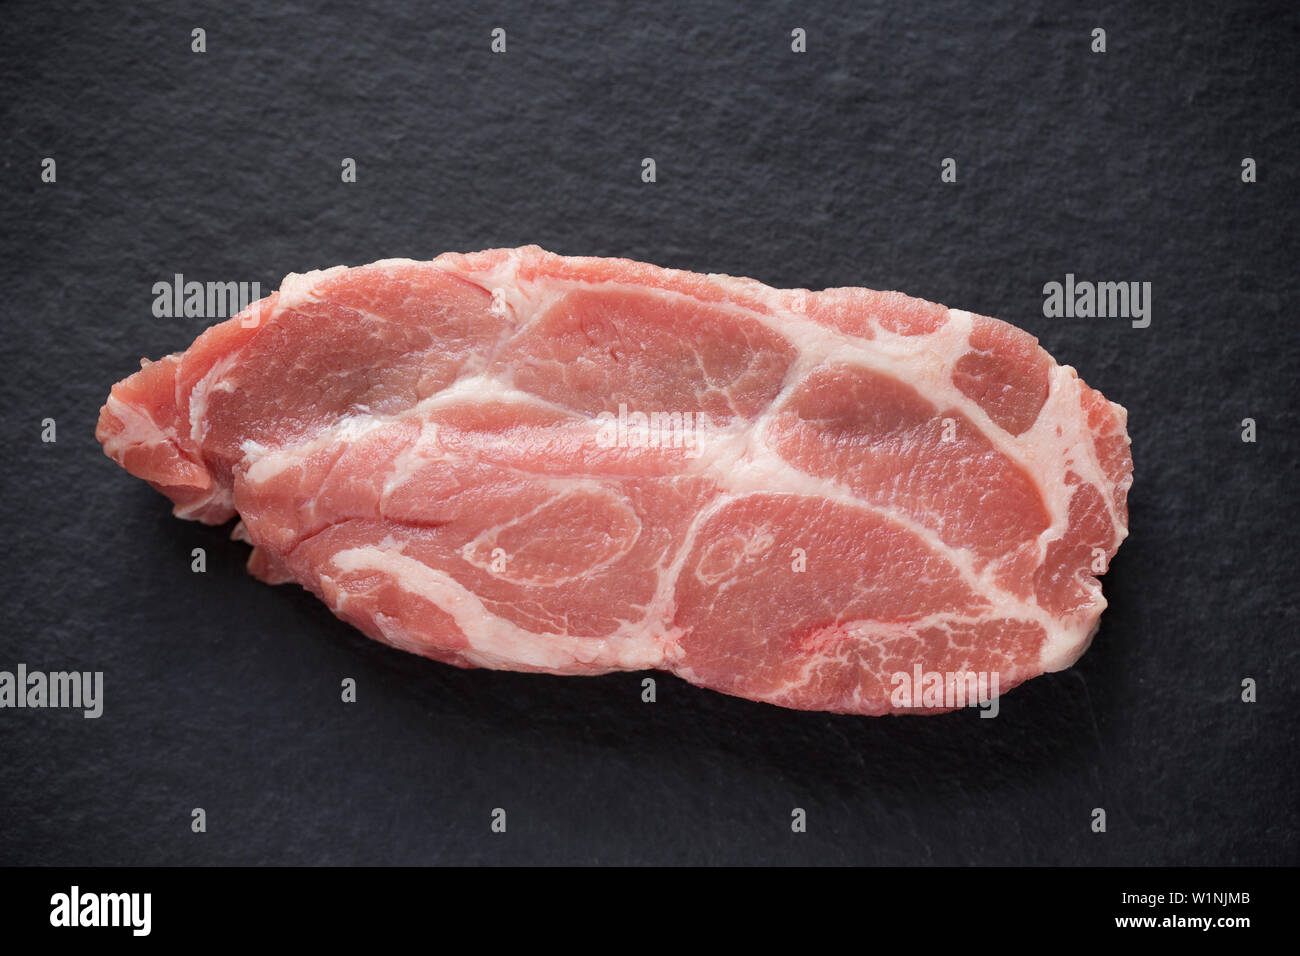 One raw, uncooked British pork shoulder steak bought from a supermarket in the UK. Dorset England UK GB Stock Photo